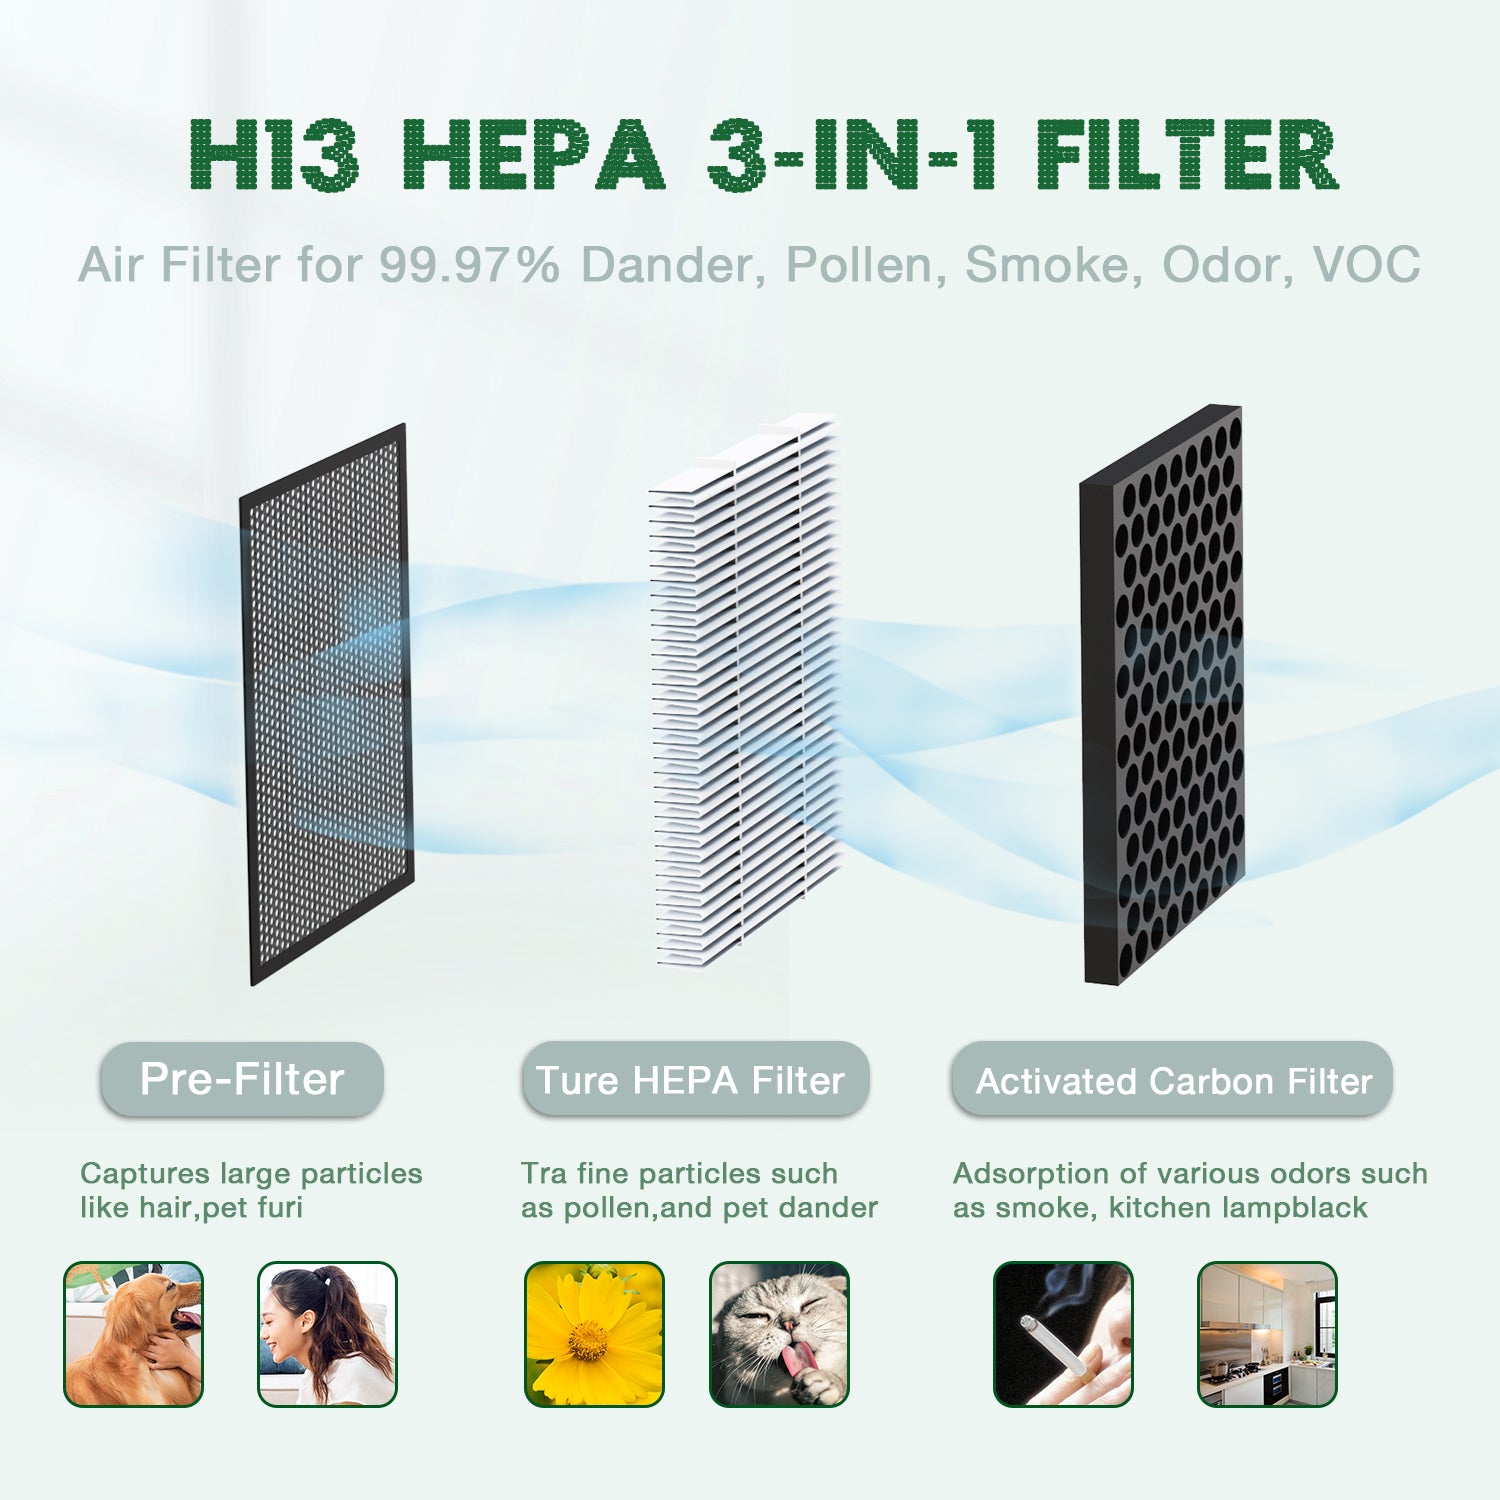 ROVACS Air Purifier RV60 Filter (2 pcs), High efficiency H13 particulate air filter and activated carbon sponge, captures 99.97% of particles with a diameter greater than or equal to 0.3 microns, lasts 3000 hours